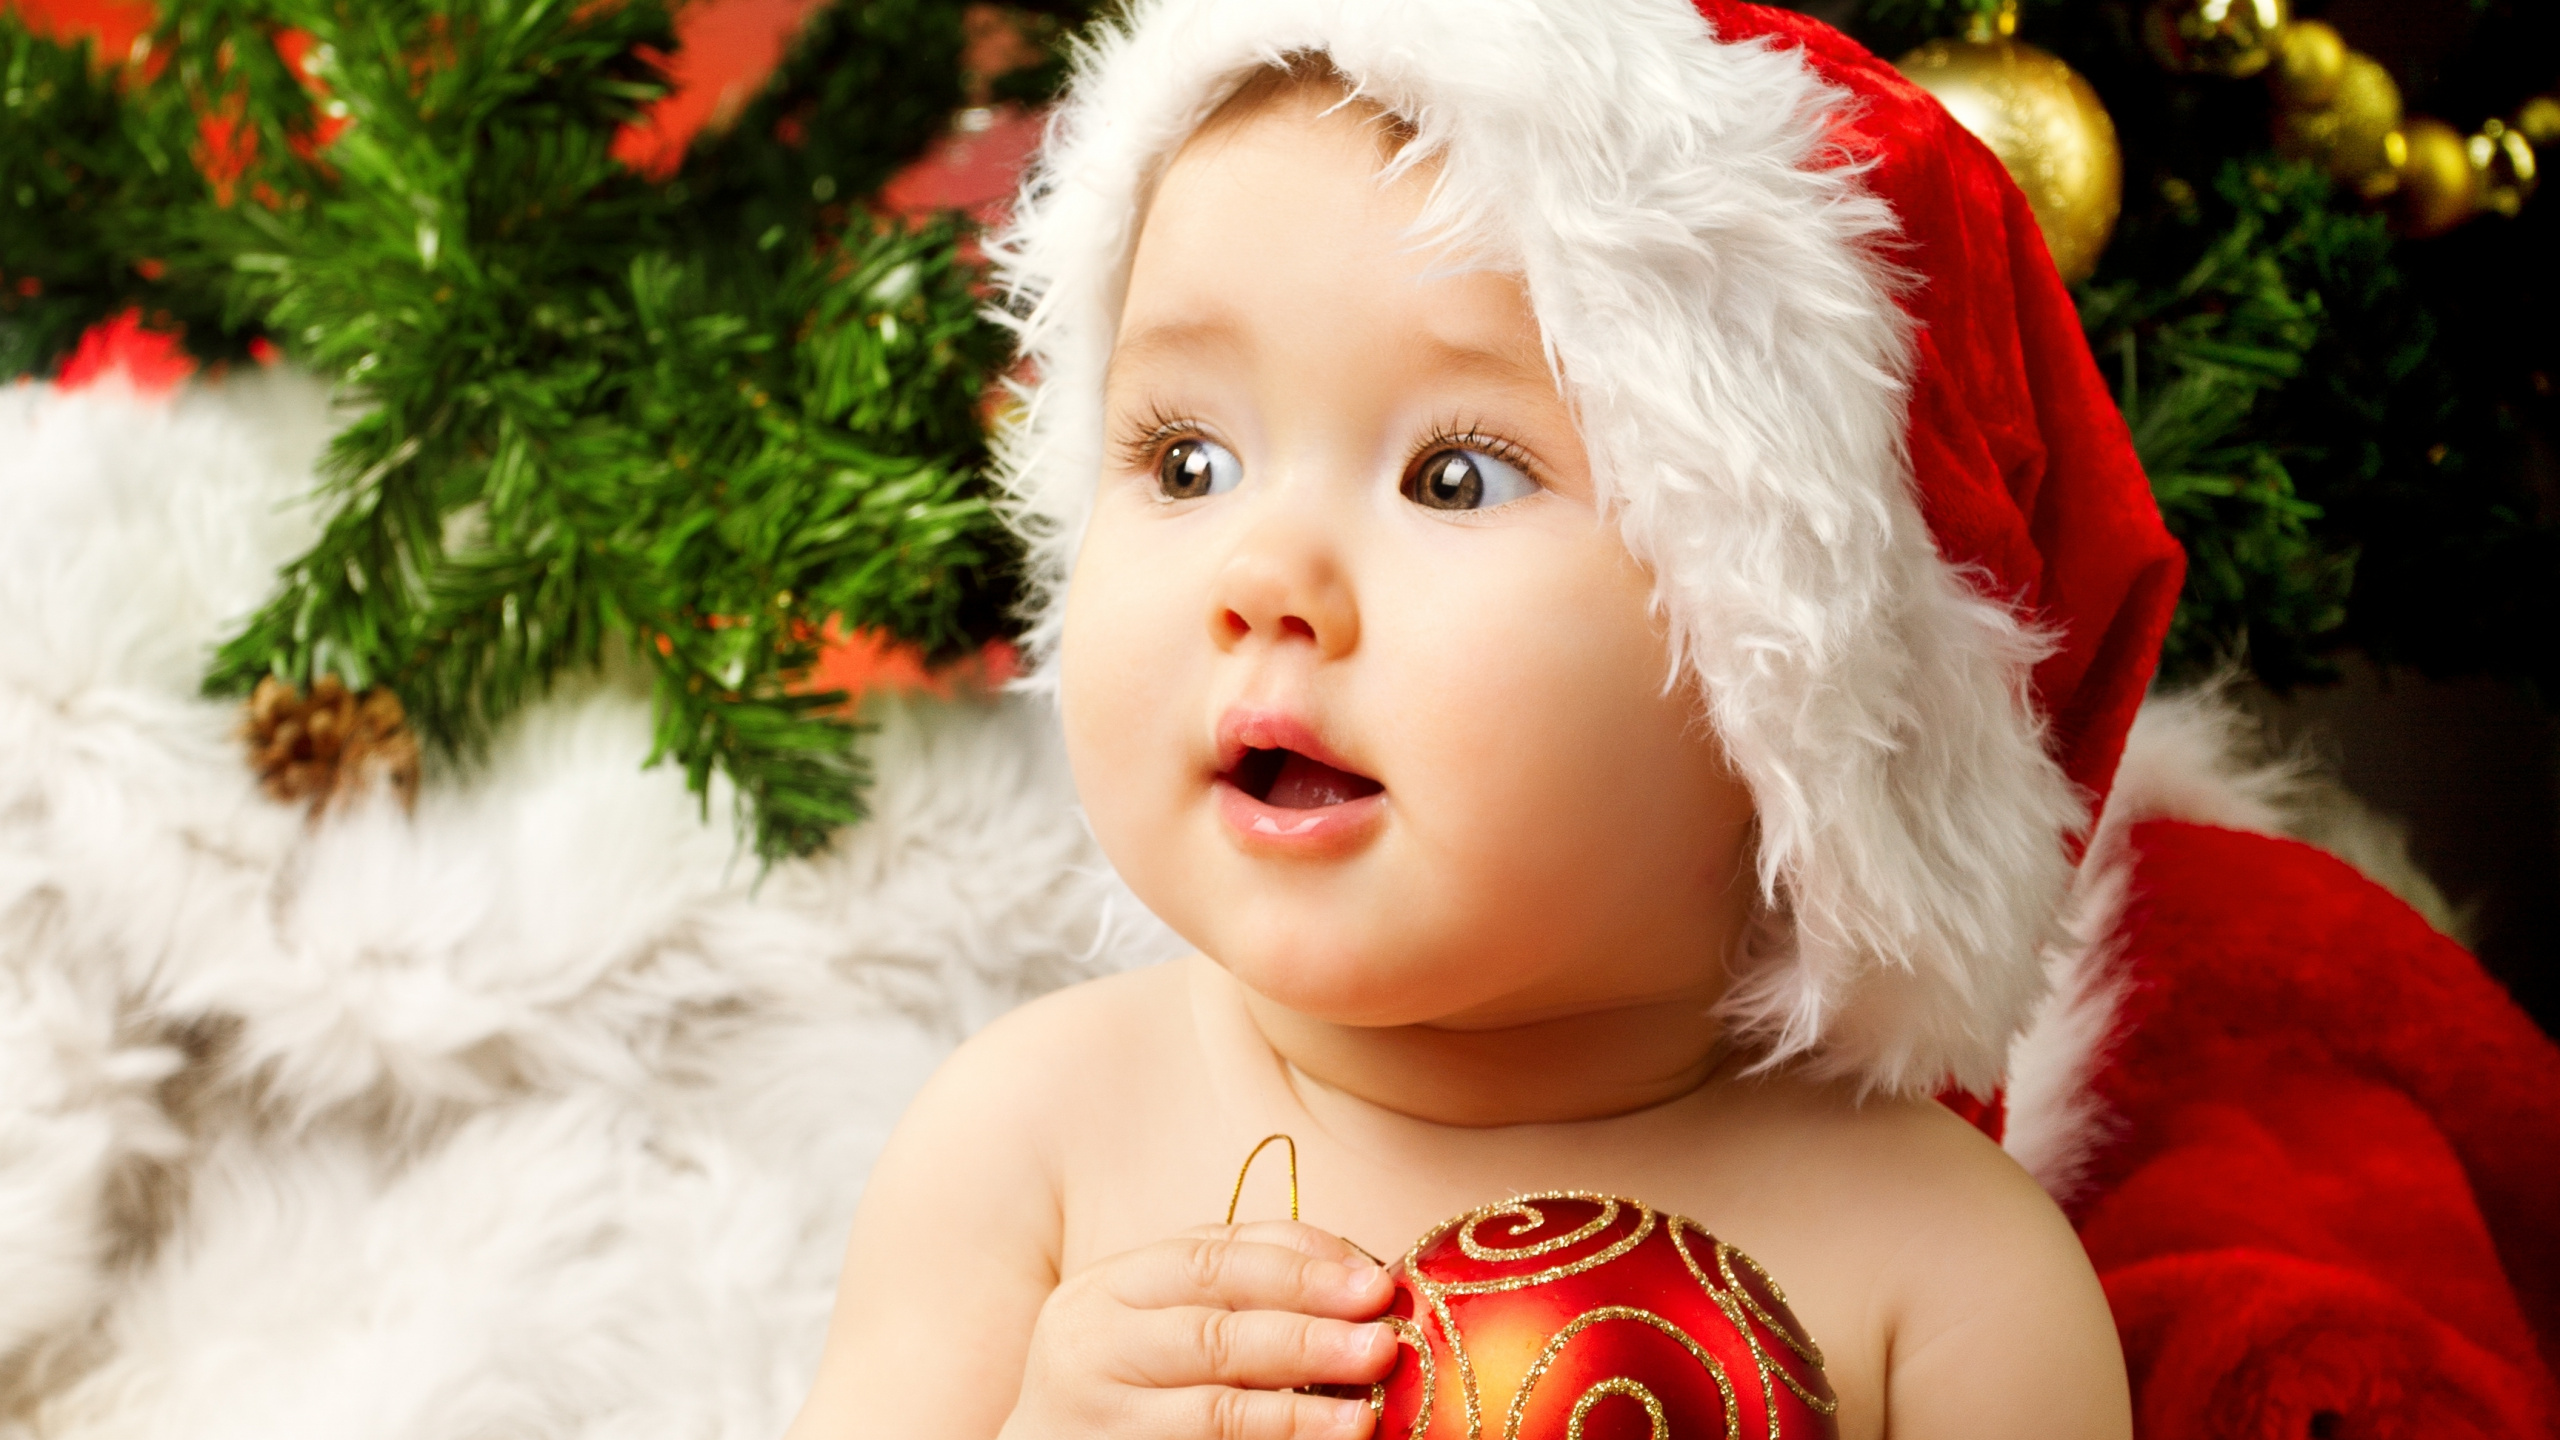 Christmas Day, Infant, Cuteness, Christmas, Child. Wallpaper in 2560x1440 Resolution